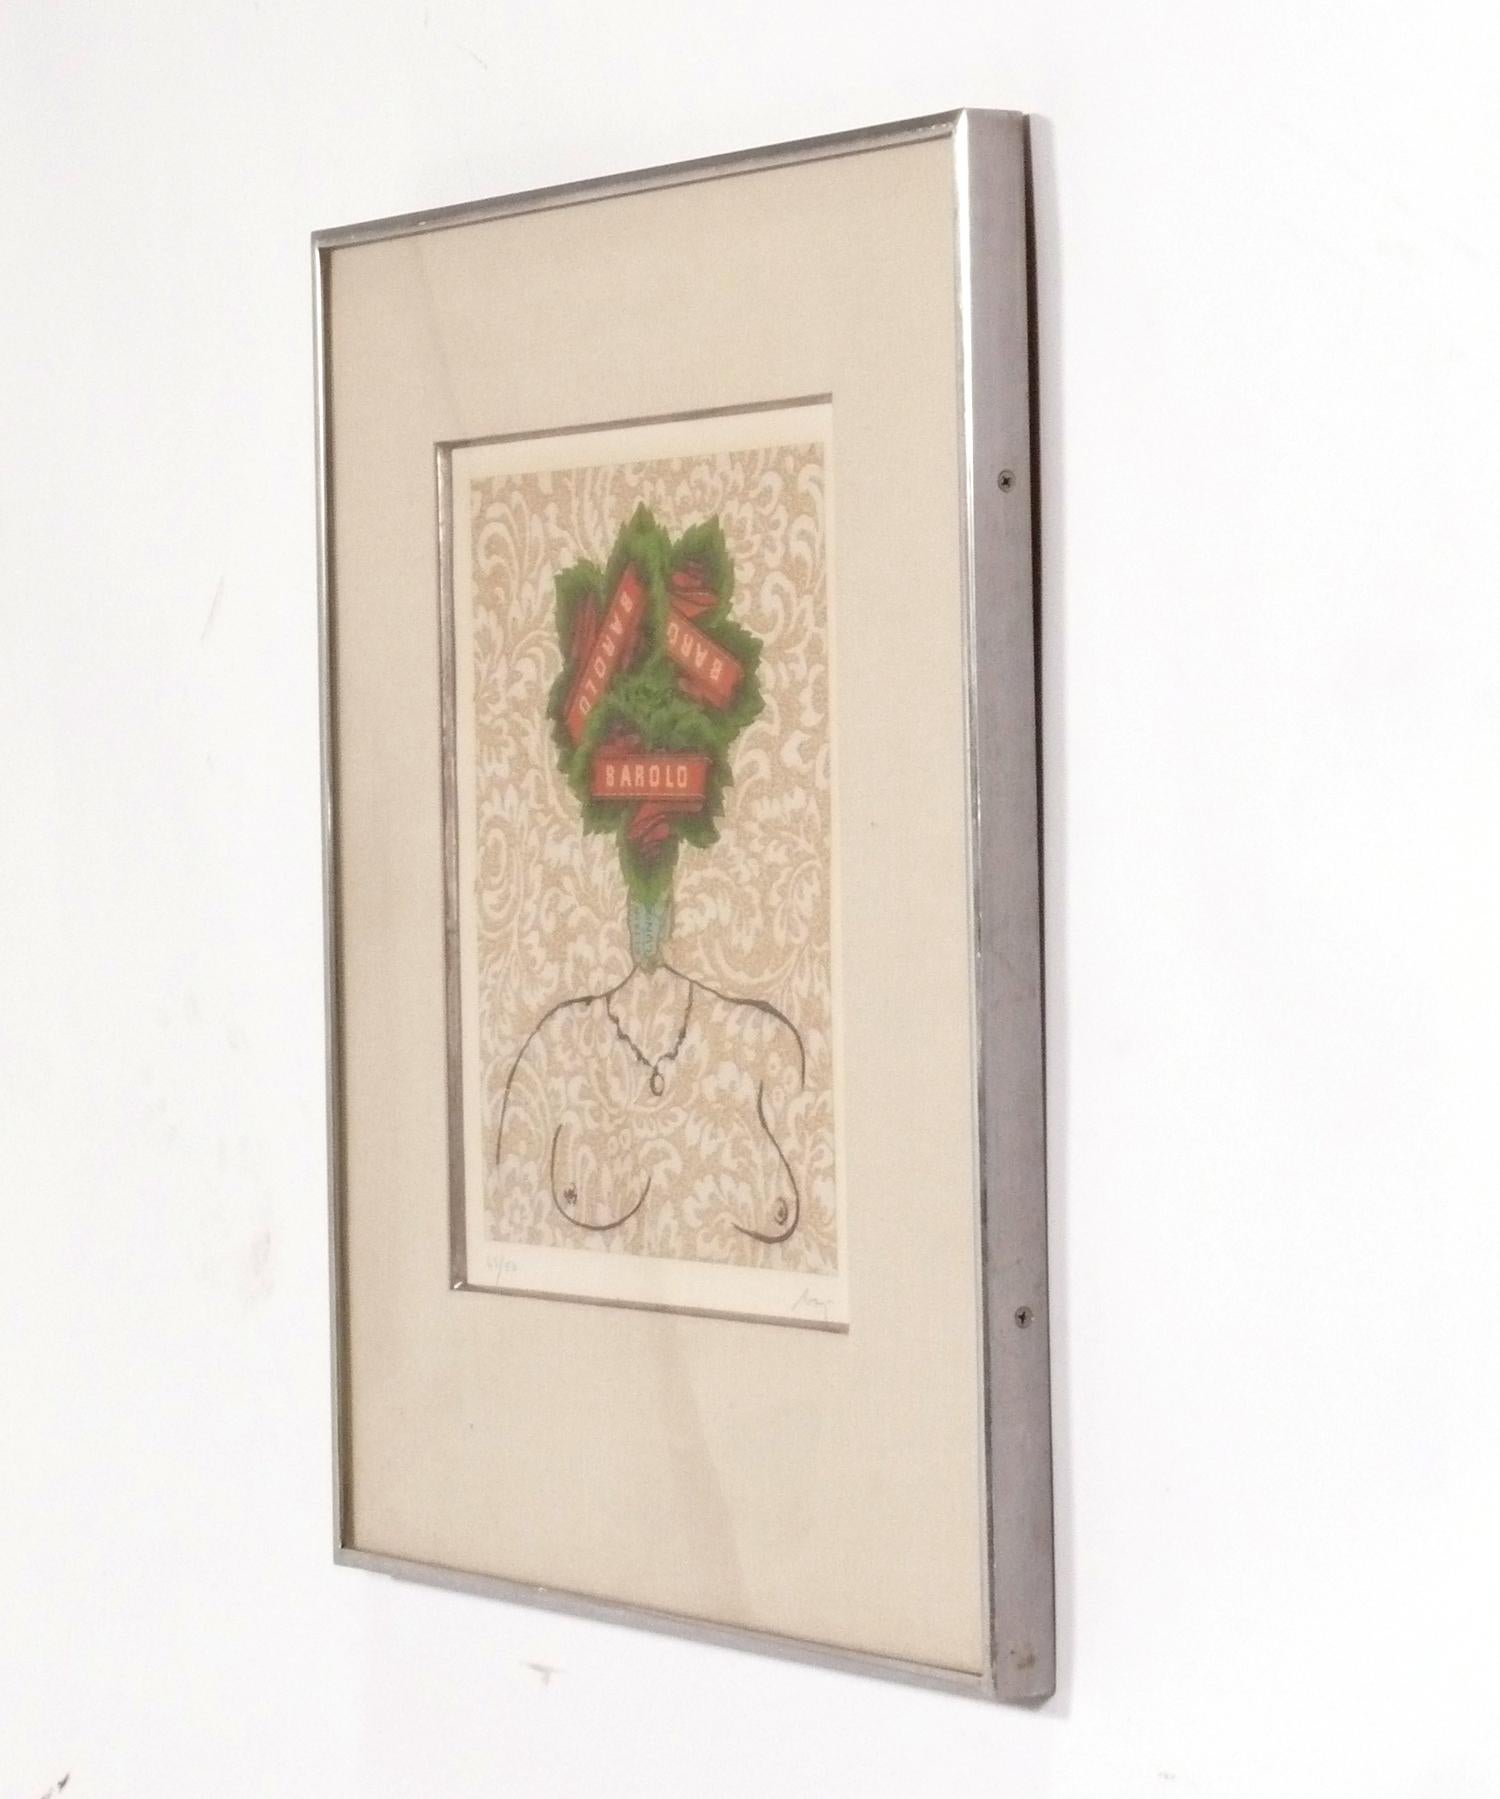 Abstract nude lithograph by Enrico Baj, Italian, circa 1960s. Entitled “Lady Jane Gray, Queen of England For Nine Days”. This piece is pencil signed and numbered by the artist, 43 of a very limited edition of only 50. It is beautifully framed in a